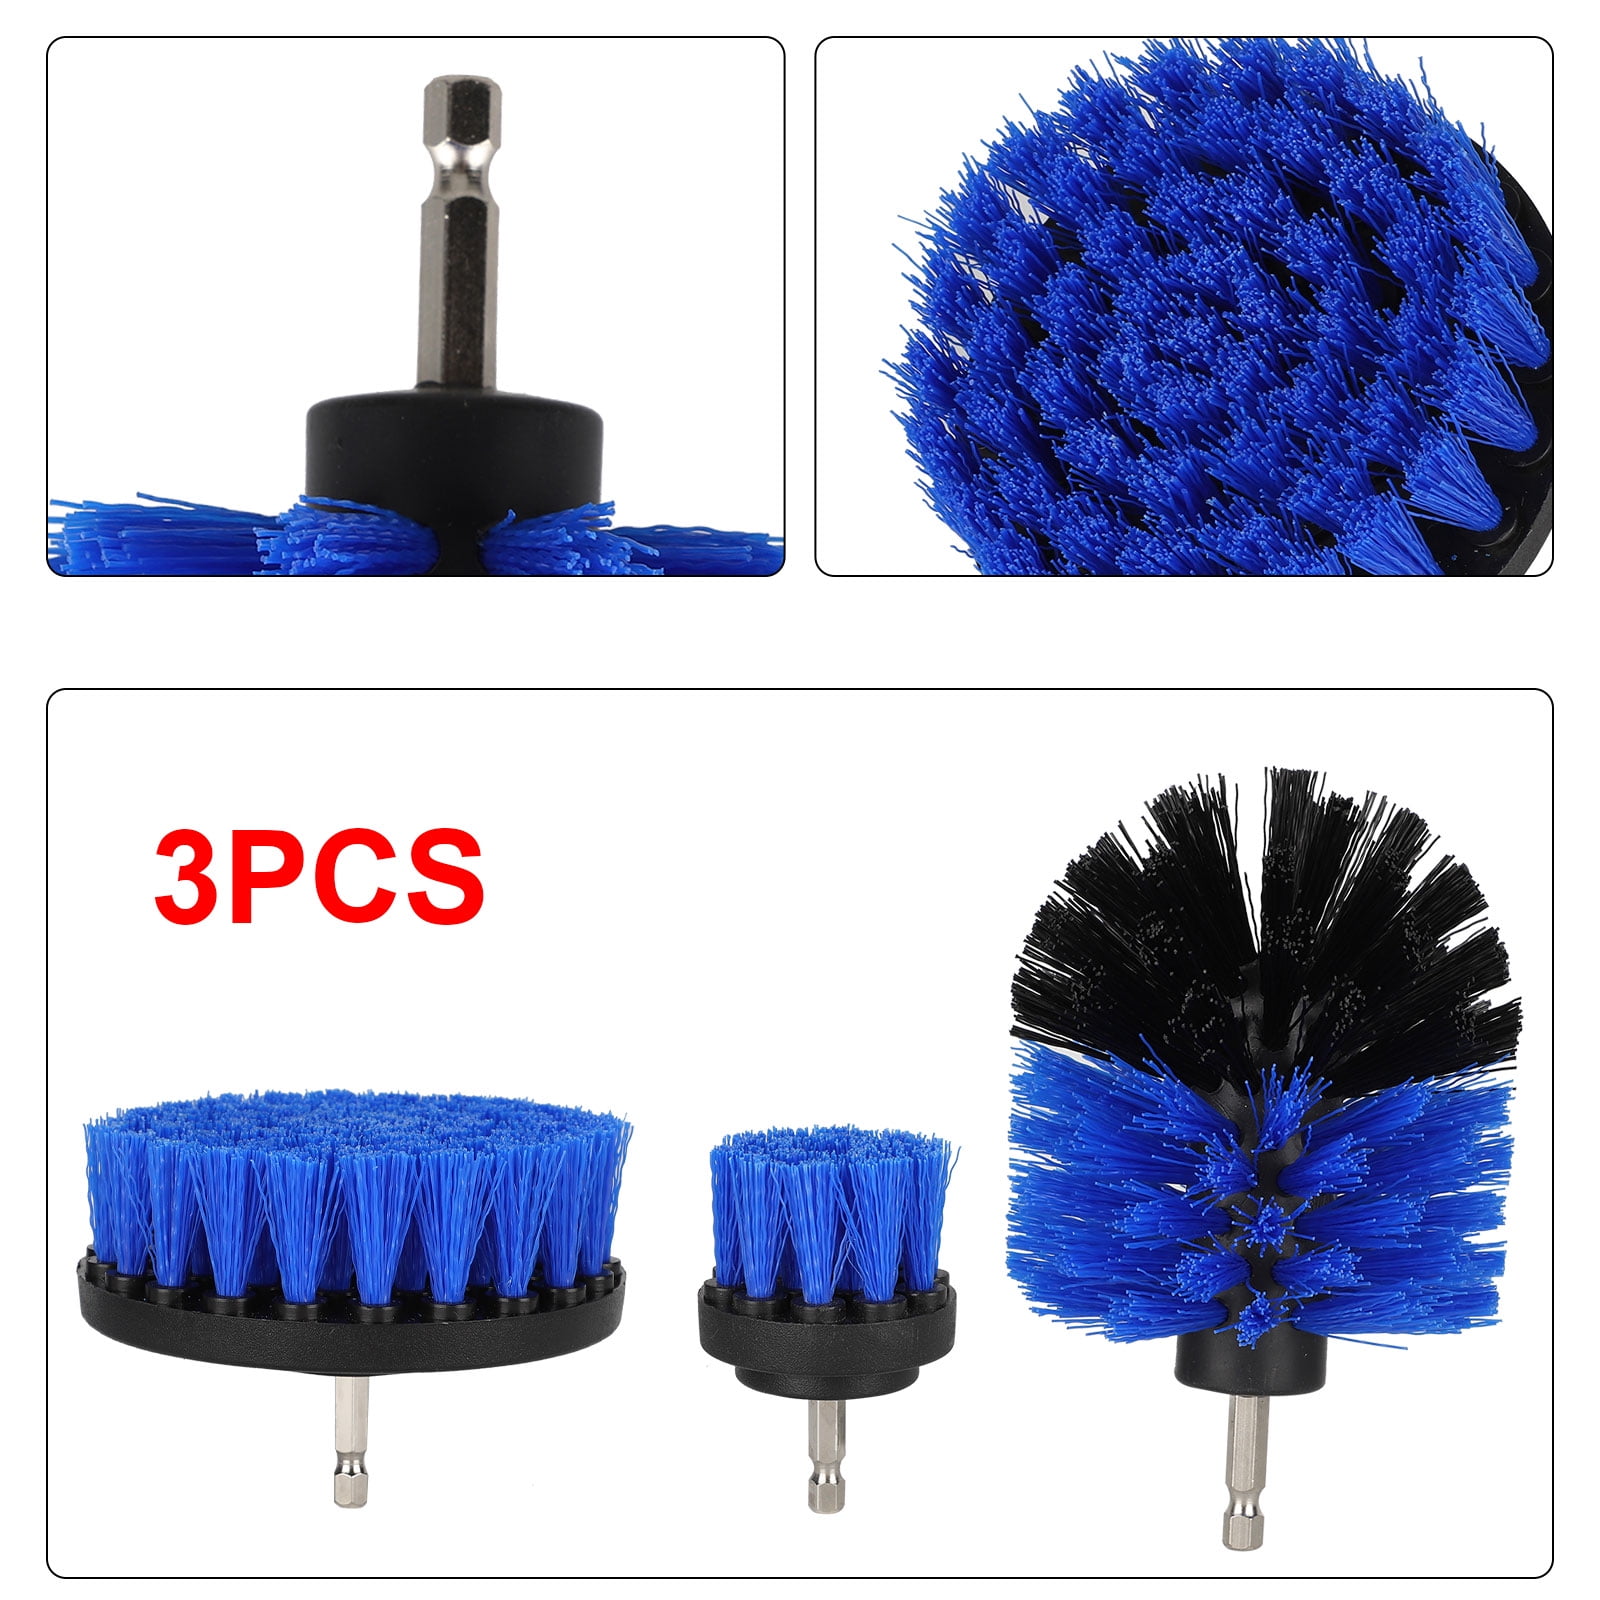 Drillbrush 3 pc. Bathroom Accessories Cleaning Set, Clean Tile & Grout, Shower  Cleaning Supplies, Y-S-42J-QC-DB at Tractor Supply Co.